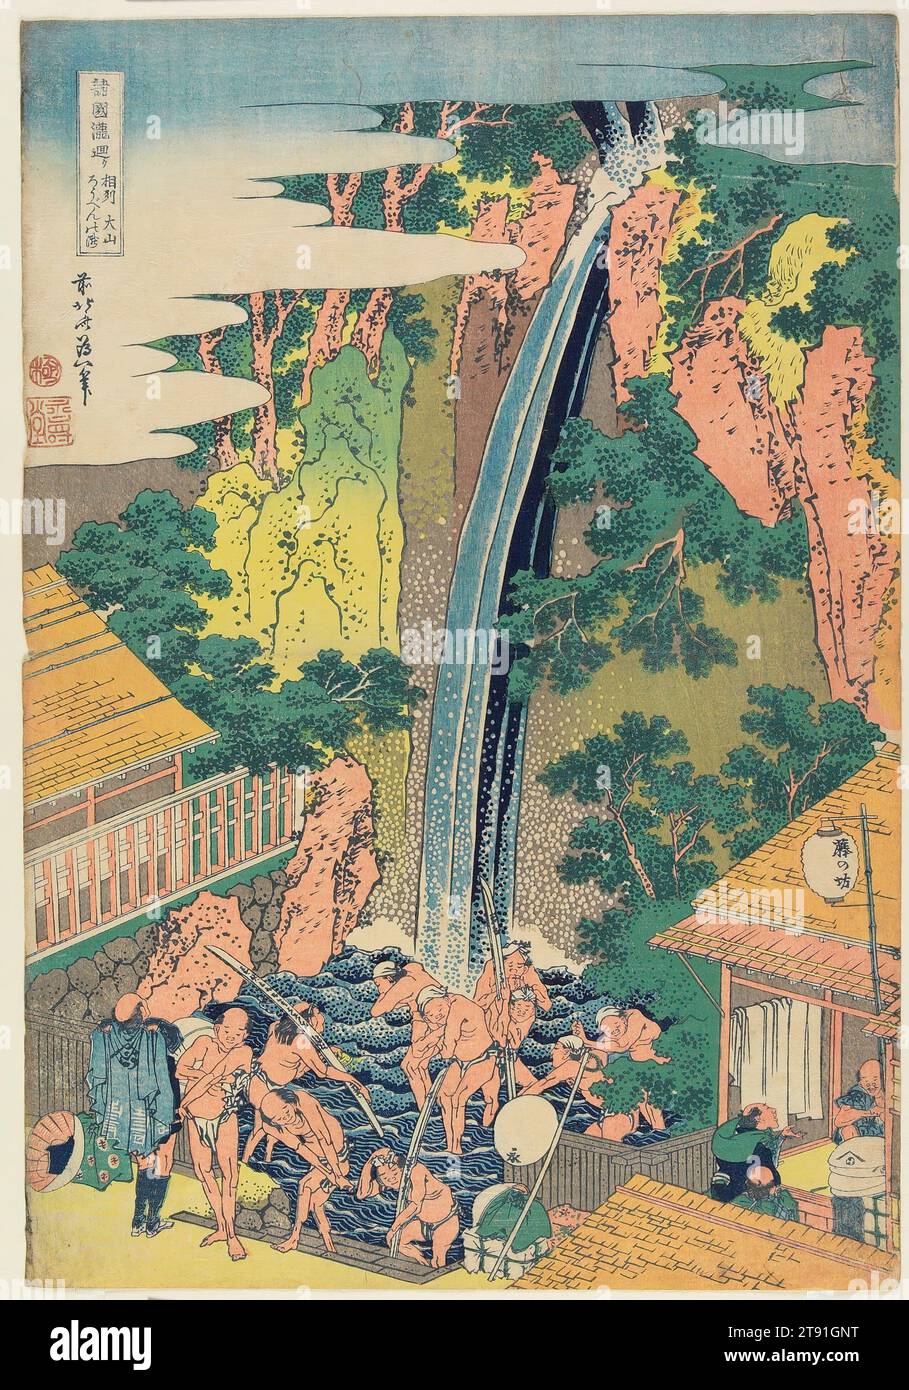 The Rōben Falls at Ōyama in Sagami Province, c. 1832, Katsushika Hokusai; Publisher: Nishimuraya Yohachi, Japanese, 1760 - 1849, 15 × 10 5/16 in. (38.1 × 26.2 cm) (image, sheet, vertical ōban), Woodblock print (nishiki-e); ink and color on paper, Japan, 19th century, The Buddhist monk Rōben (689-773) was a religious adviser to Emperor Shōmu. His efforts to establish Tōdai Temple led to his appointment as sōjō (high priest). He was the first of many remarkable priests to hold that exalted position in the country’s largest and most important Buddhist temple. Stock Photo